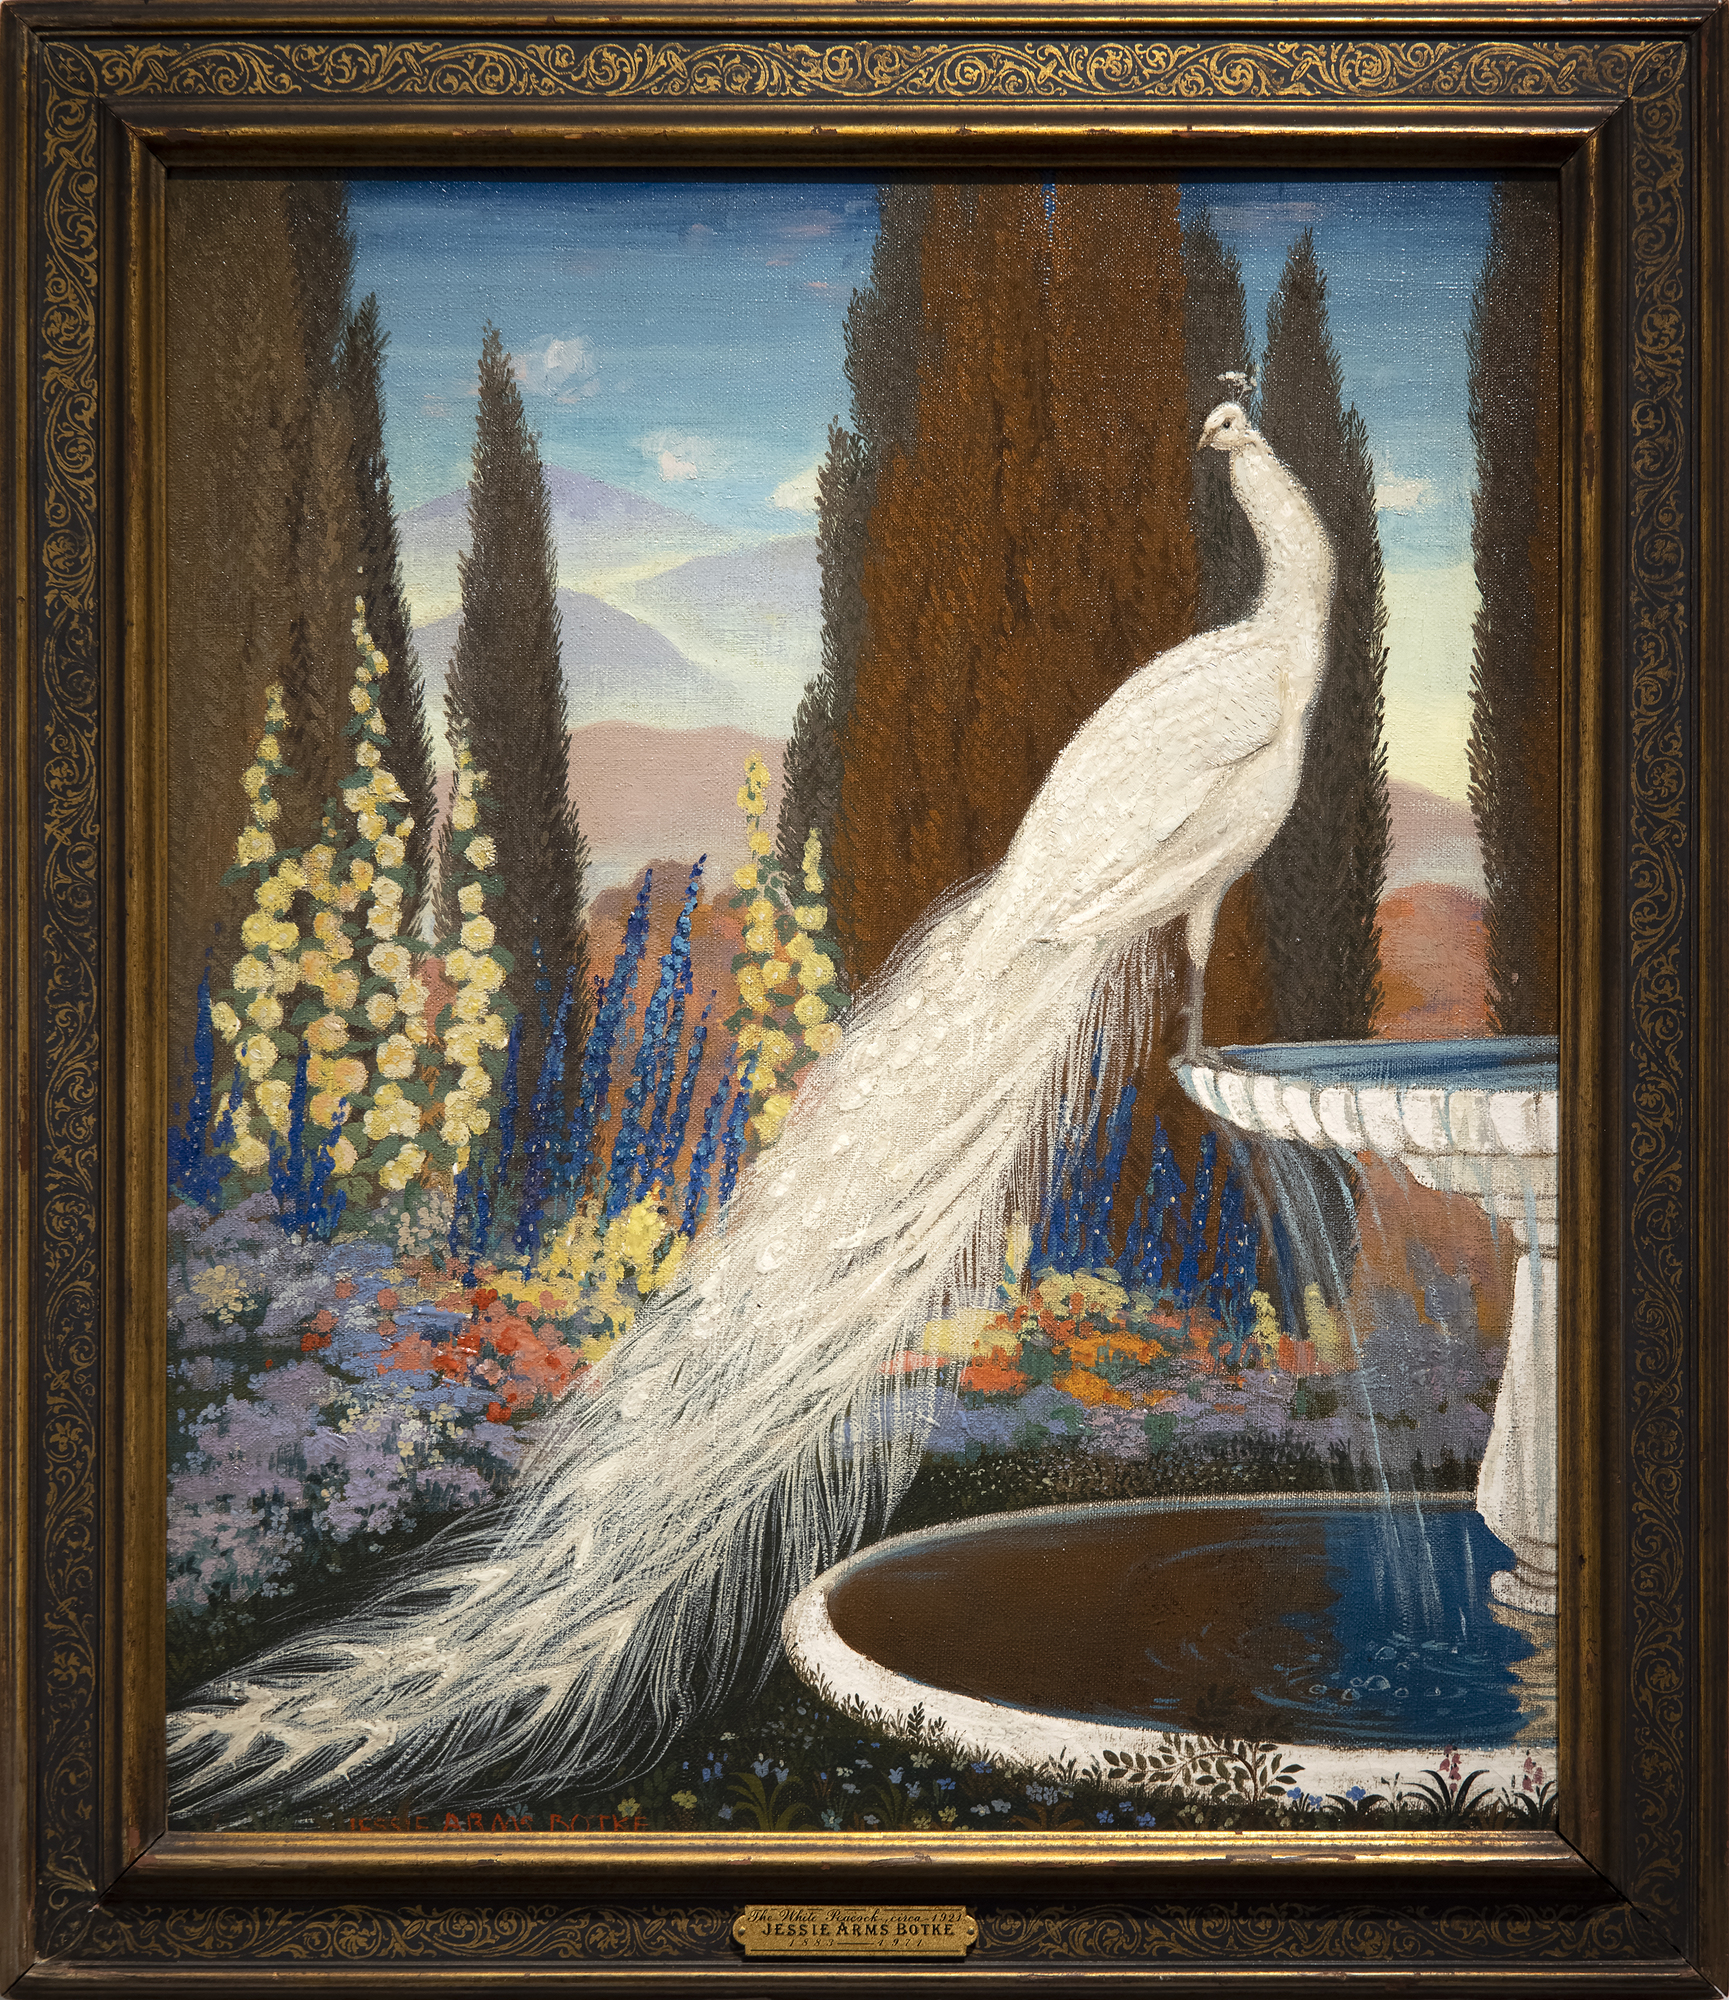 The Arts and Crafts Movement in Great Britain and the corresponding ripples that made their way across the Atlantic Ocean were felt in the work of Jesse Arms Botke (1883-1971).  Botke was born in Chicago, Illinois but found her home in California, where she had a successful career working first in Carmel and later in Southern California. 
<br>
<br>Rich textures, extensive use of gold leaf, and highly stylized birds would become synonymous with Botke's mature work as she established herself as one of the West Coast’s leading decorative mural painters of the 20th century.
<br>
<br>"The White Peacock" (1922) shows an idyllic landscape with Botke's signature bird subject matter; the white peacock and cockatoos were among her favorite aviary subjects. Her work today can be found in countless museum collections, including the Art Institute, Chicago.